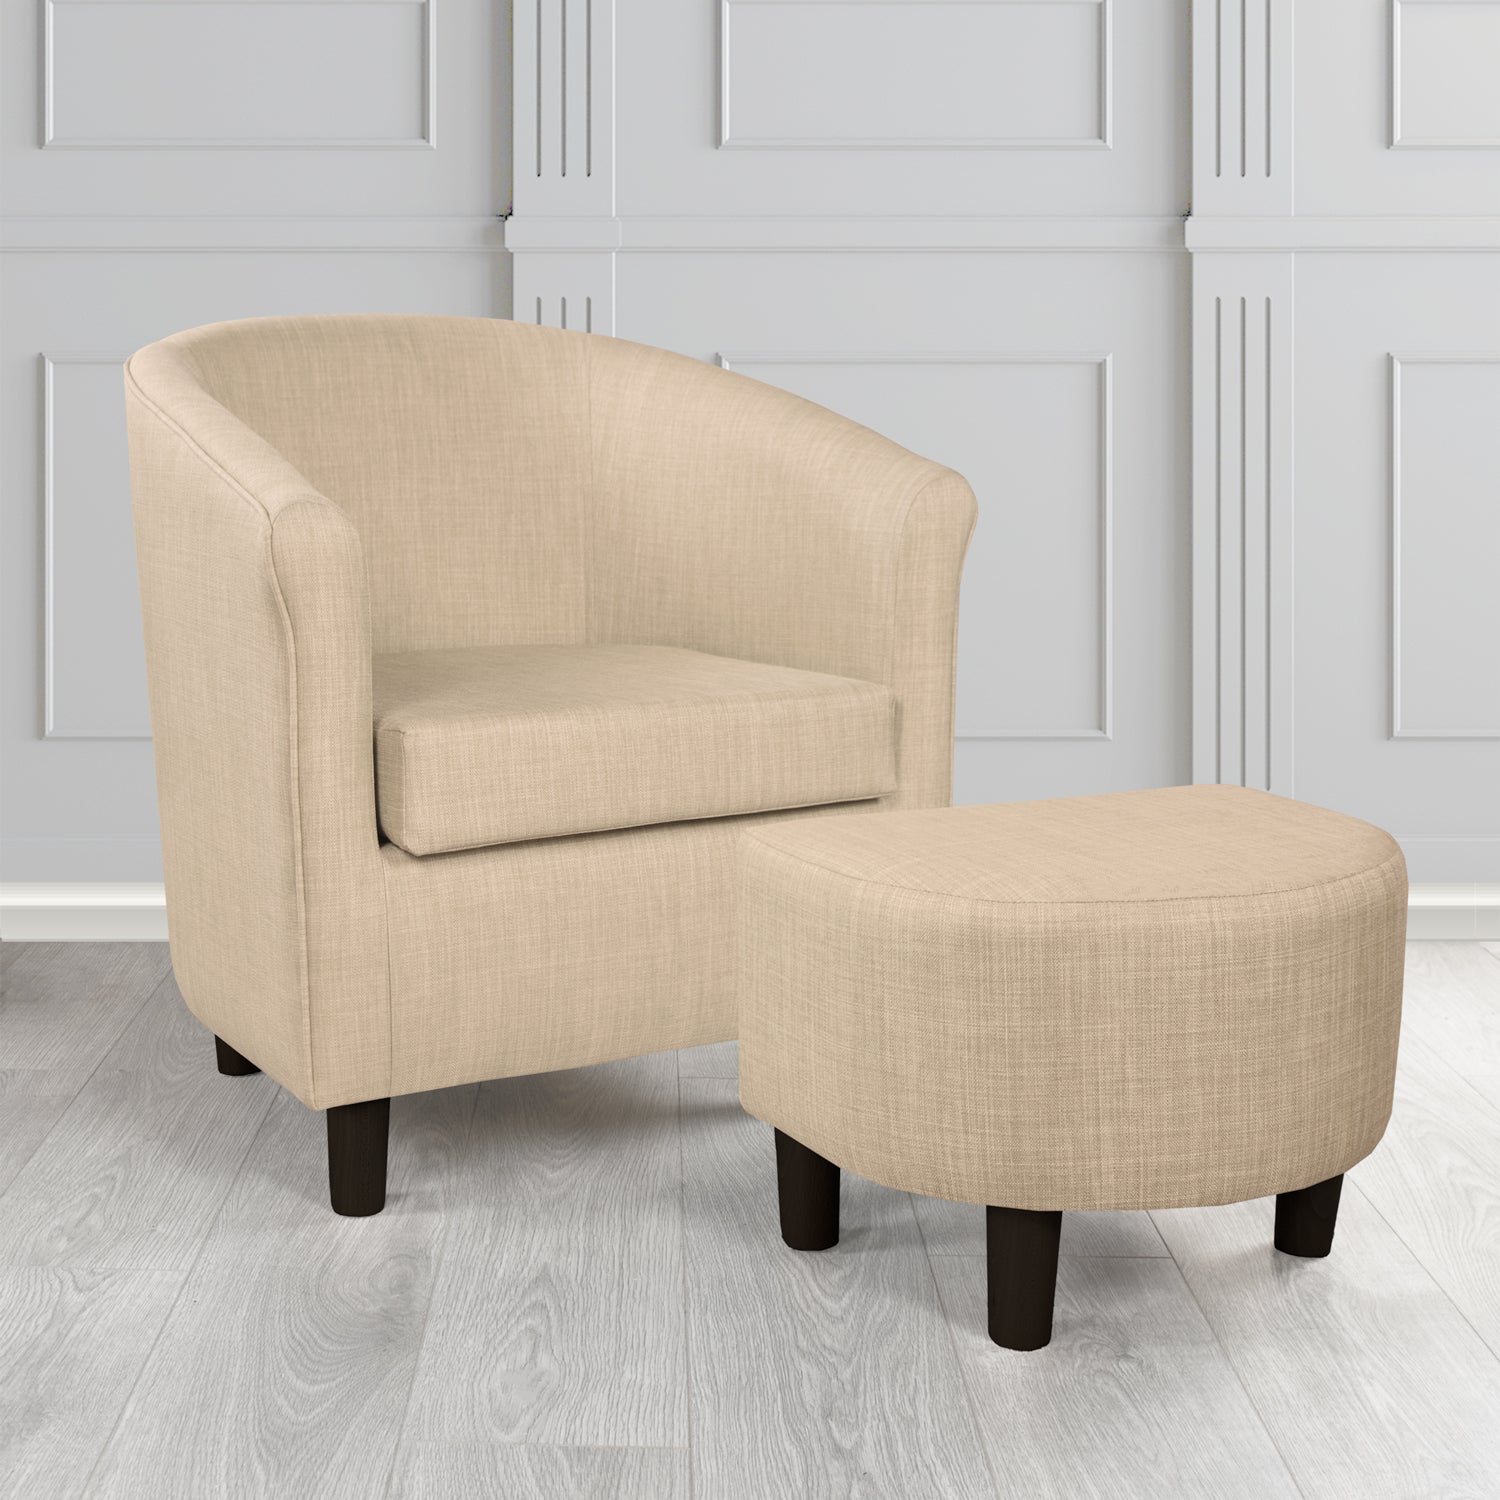 Tuscany Charles Sand Linen Plain Fabric Tub Chair with Dee Footstool Set - The Tub Chair Shop